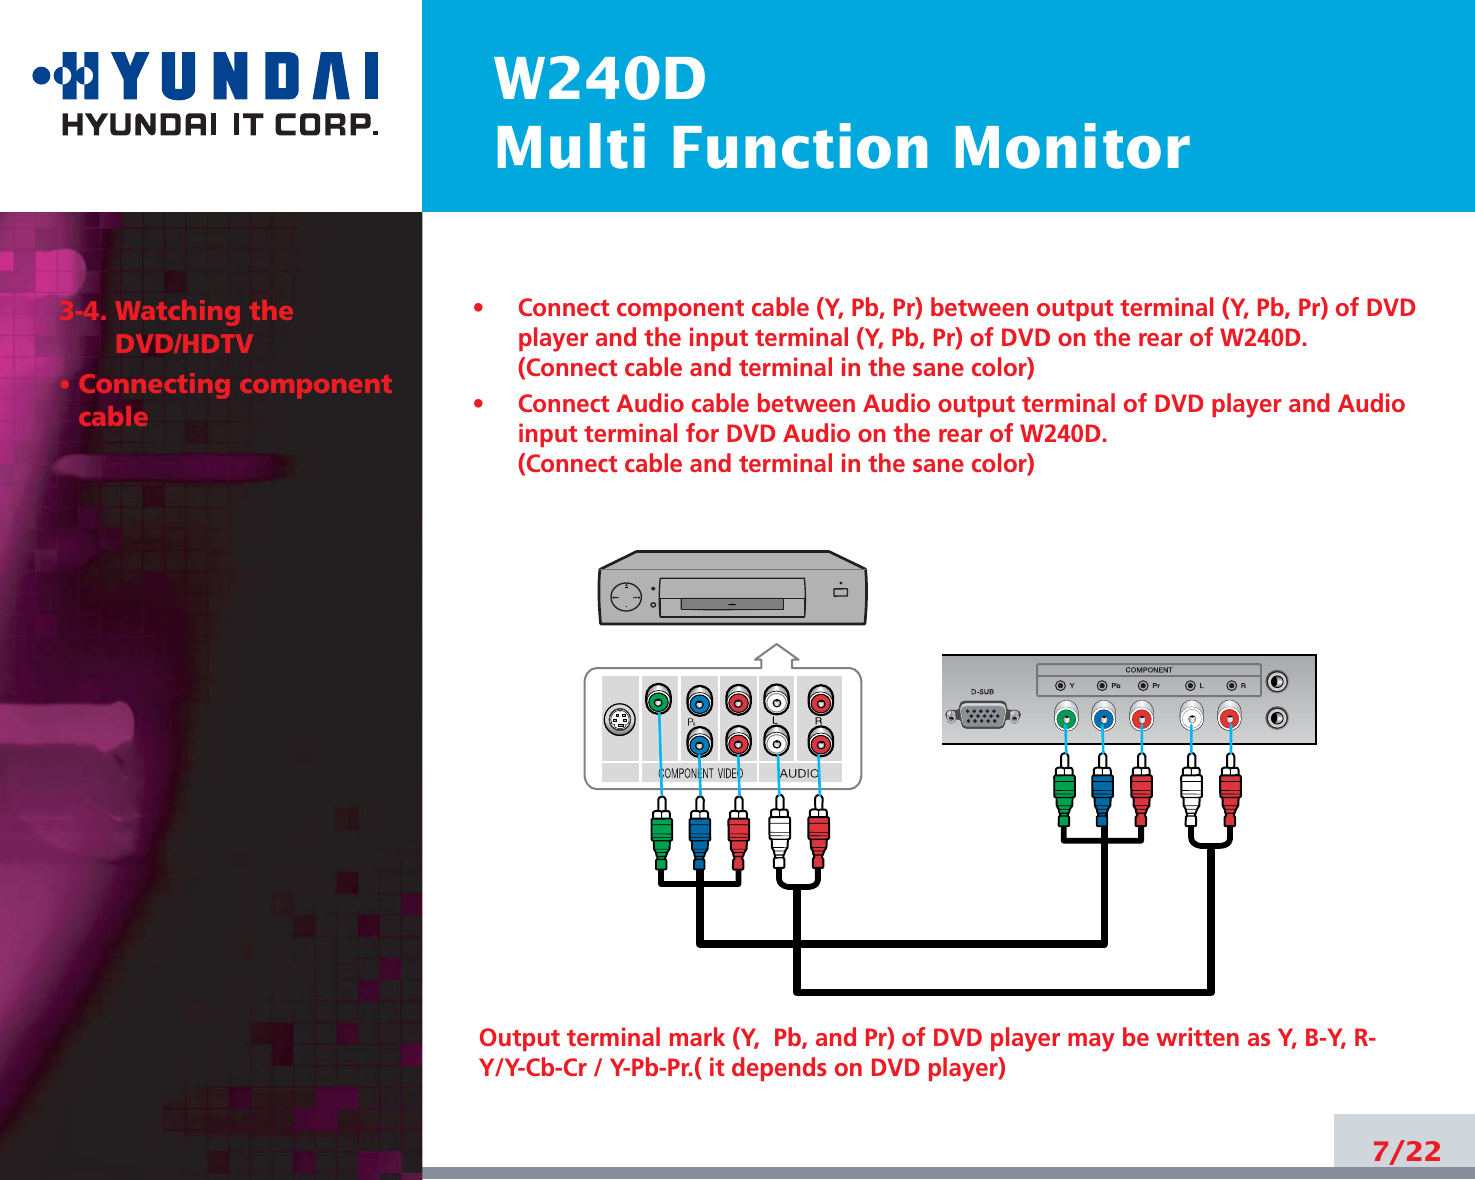 W240DMulti Function Monitor3-4. Watching theDVD/HDTV• Connecting componentcable•     Connect component cable (Y, Pb, Pr) between output terminal (Y, Pb, Pr) of DVDplayer and the input terminal (Y, Pb, Pr) of DVD on the rear of W240D.(Connect cable and terminal in the sane color)•     Connect Audio cable between Audio output terminal of DVD player and Audioinput terminal for DVD Audio on the rear of W240D.(Connect cable and terminal in the sane color)Output terminal mark (Y,  Pb, and Pr) of DVD player may be written as Y, B-Y, R-Y/Y-Cb-Cr / Y-Pb-Pr.( it depends on DVD player)7/22